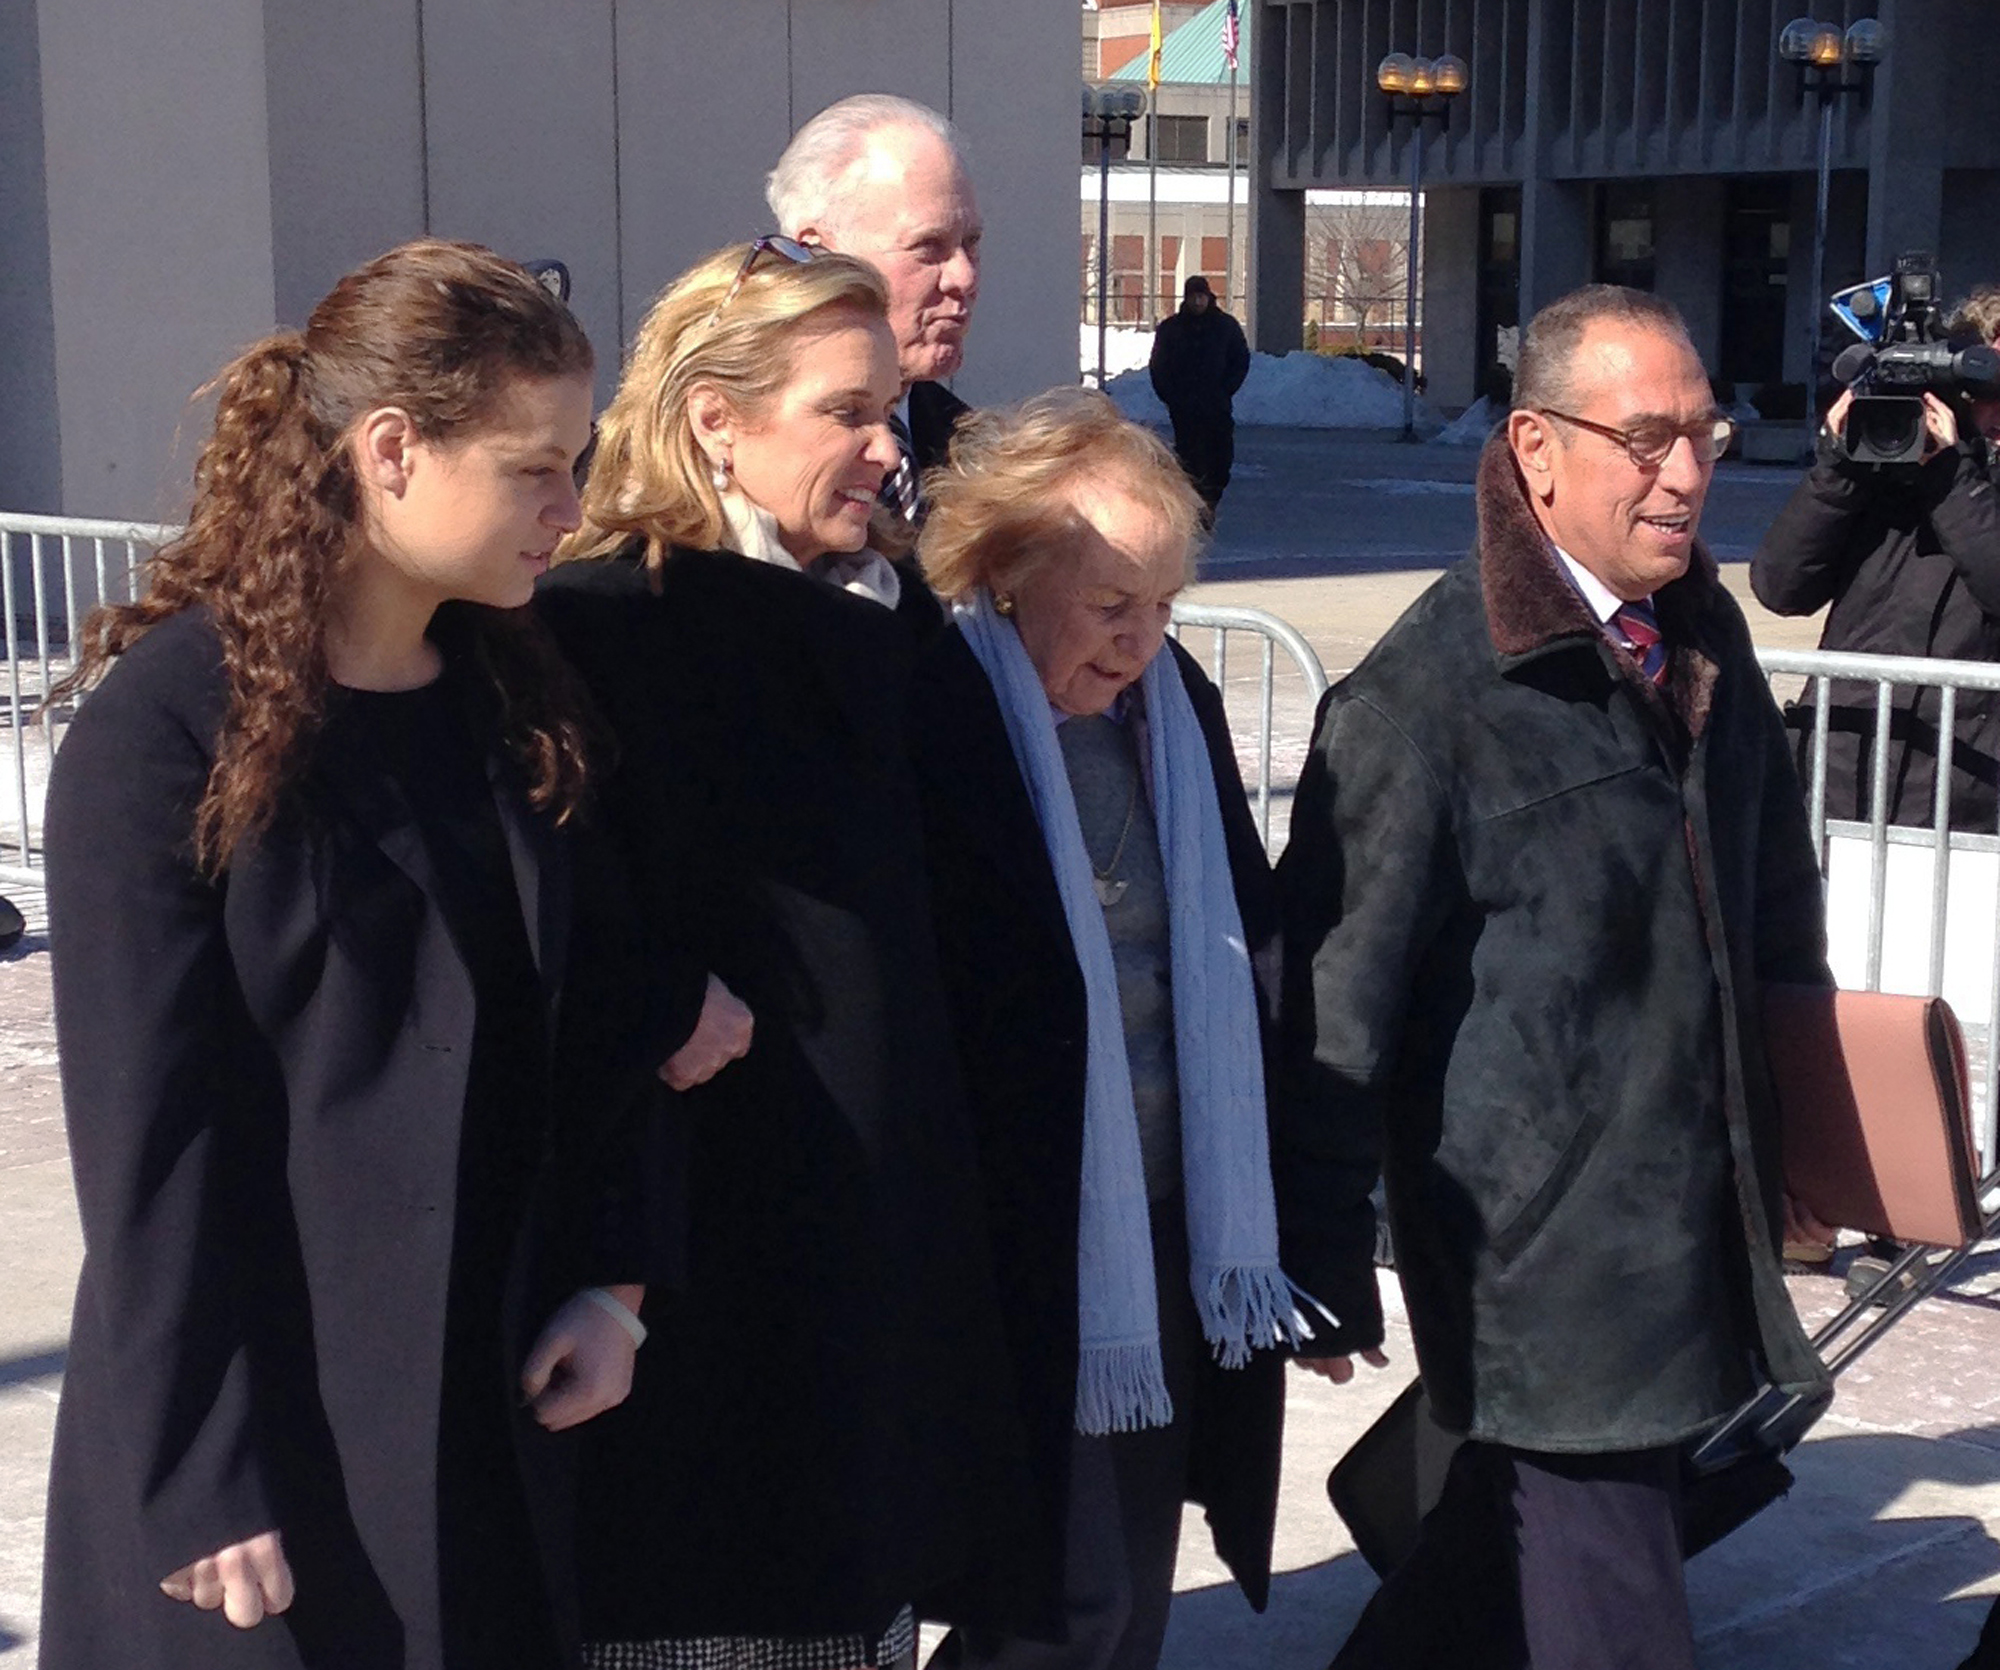 Kerry Kennedy, second from left, walks with her mother, Ethel Kennedy, third from left, as she leaves the Westchester County Courthouse, Friday, Feb. 28, 2014 in White Plains, N.Y. (Jim Fitzgerald / AP)